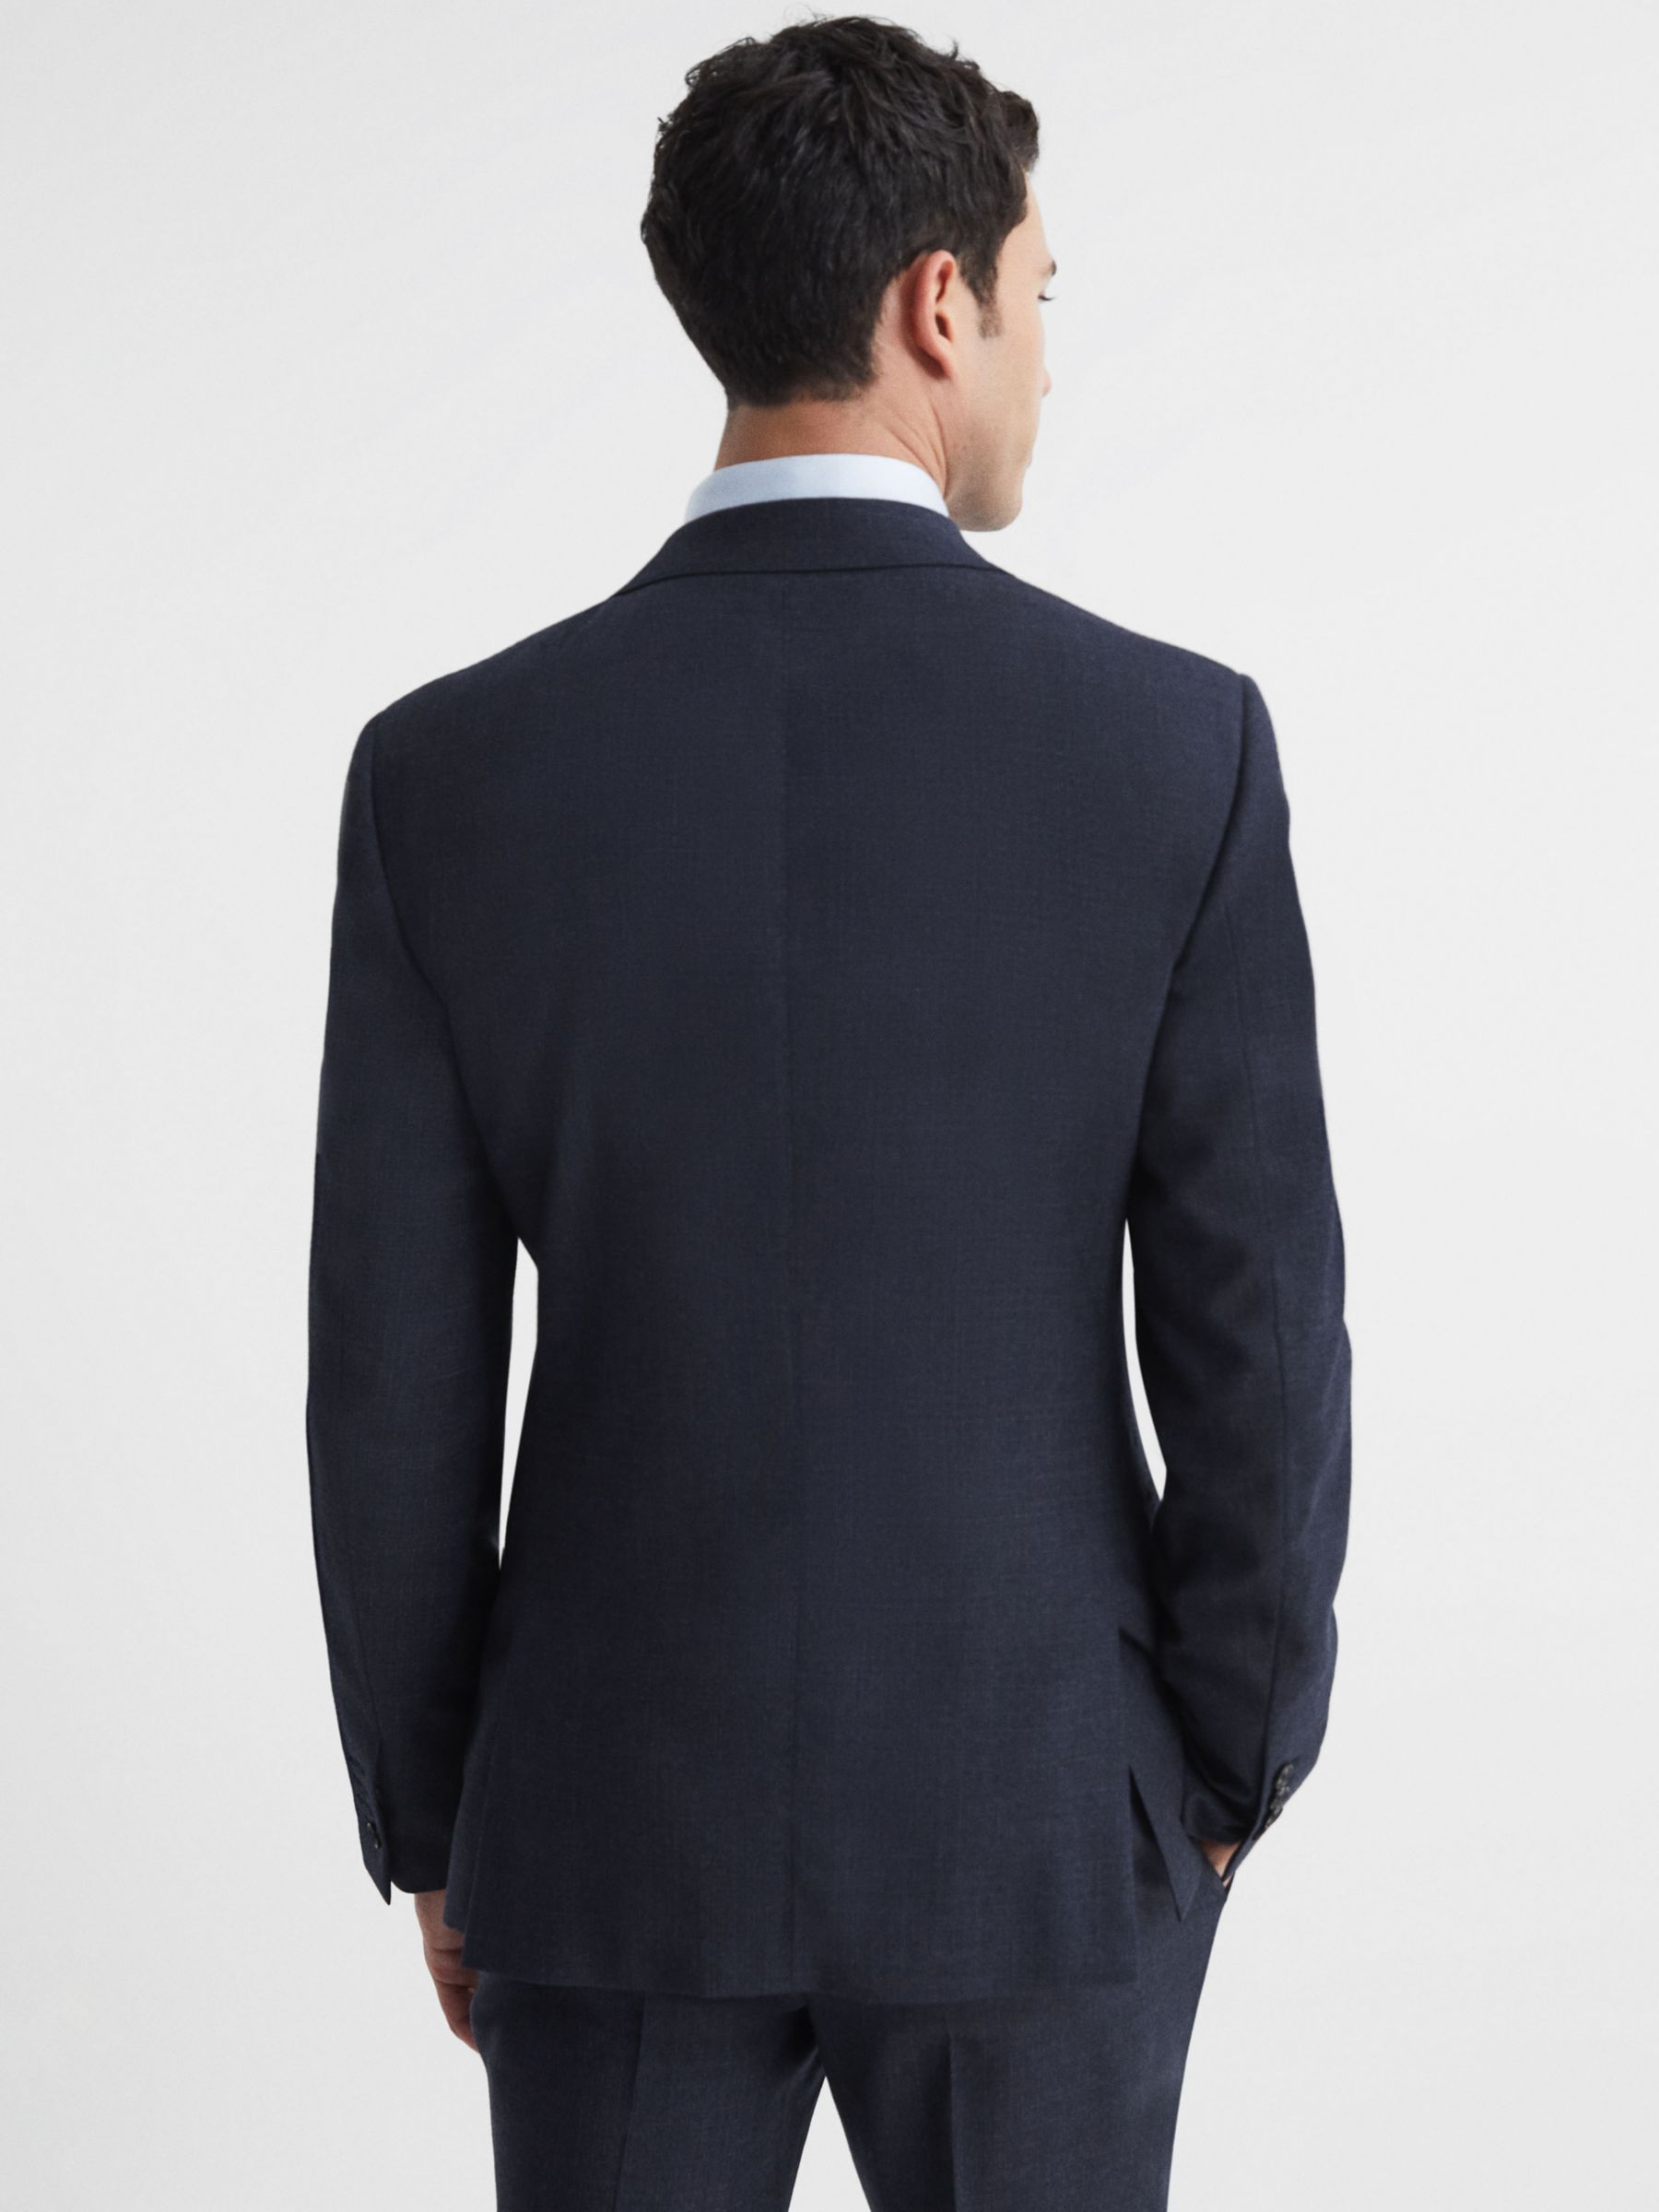 Buy Reiss Dunn Textured Wool Tailored Fit Suit Jacket, Navy Online at johnlewis.com